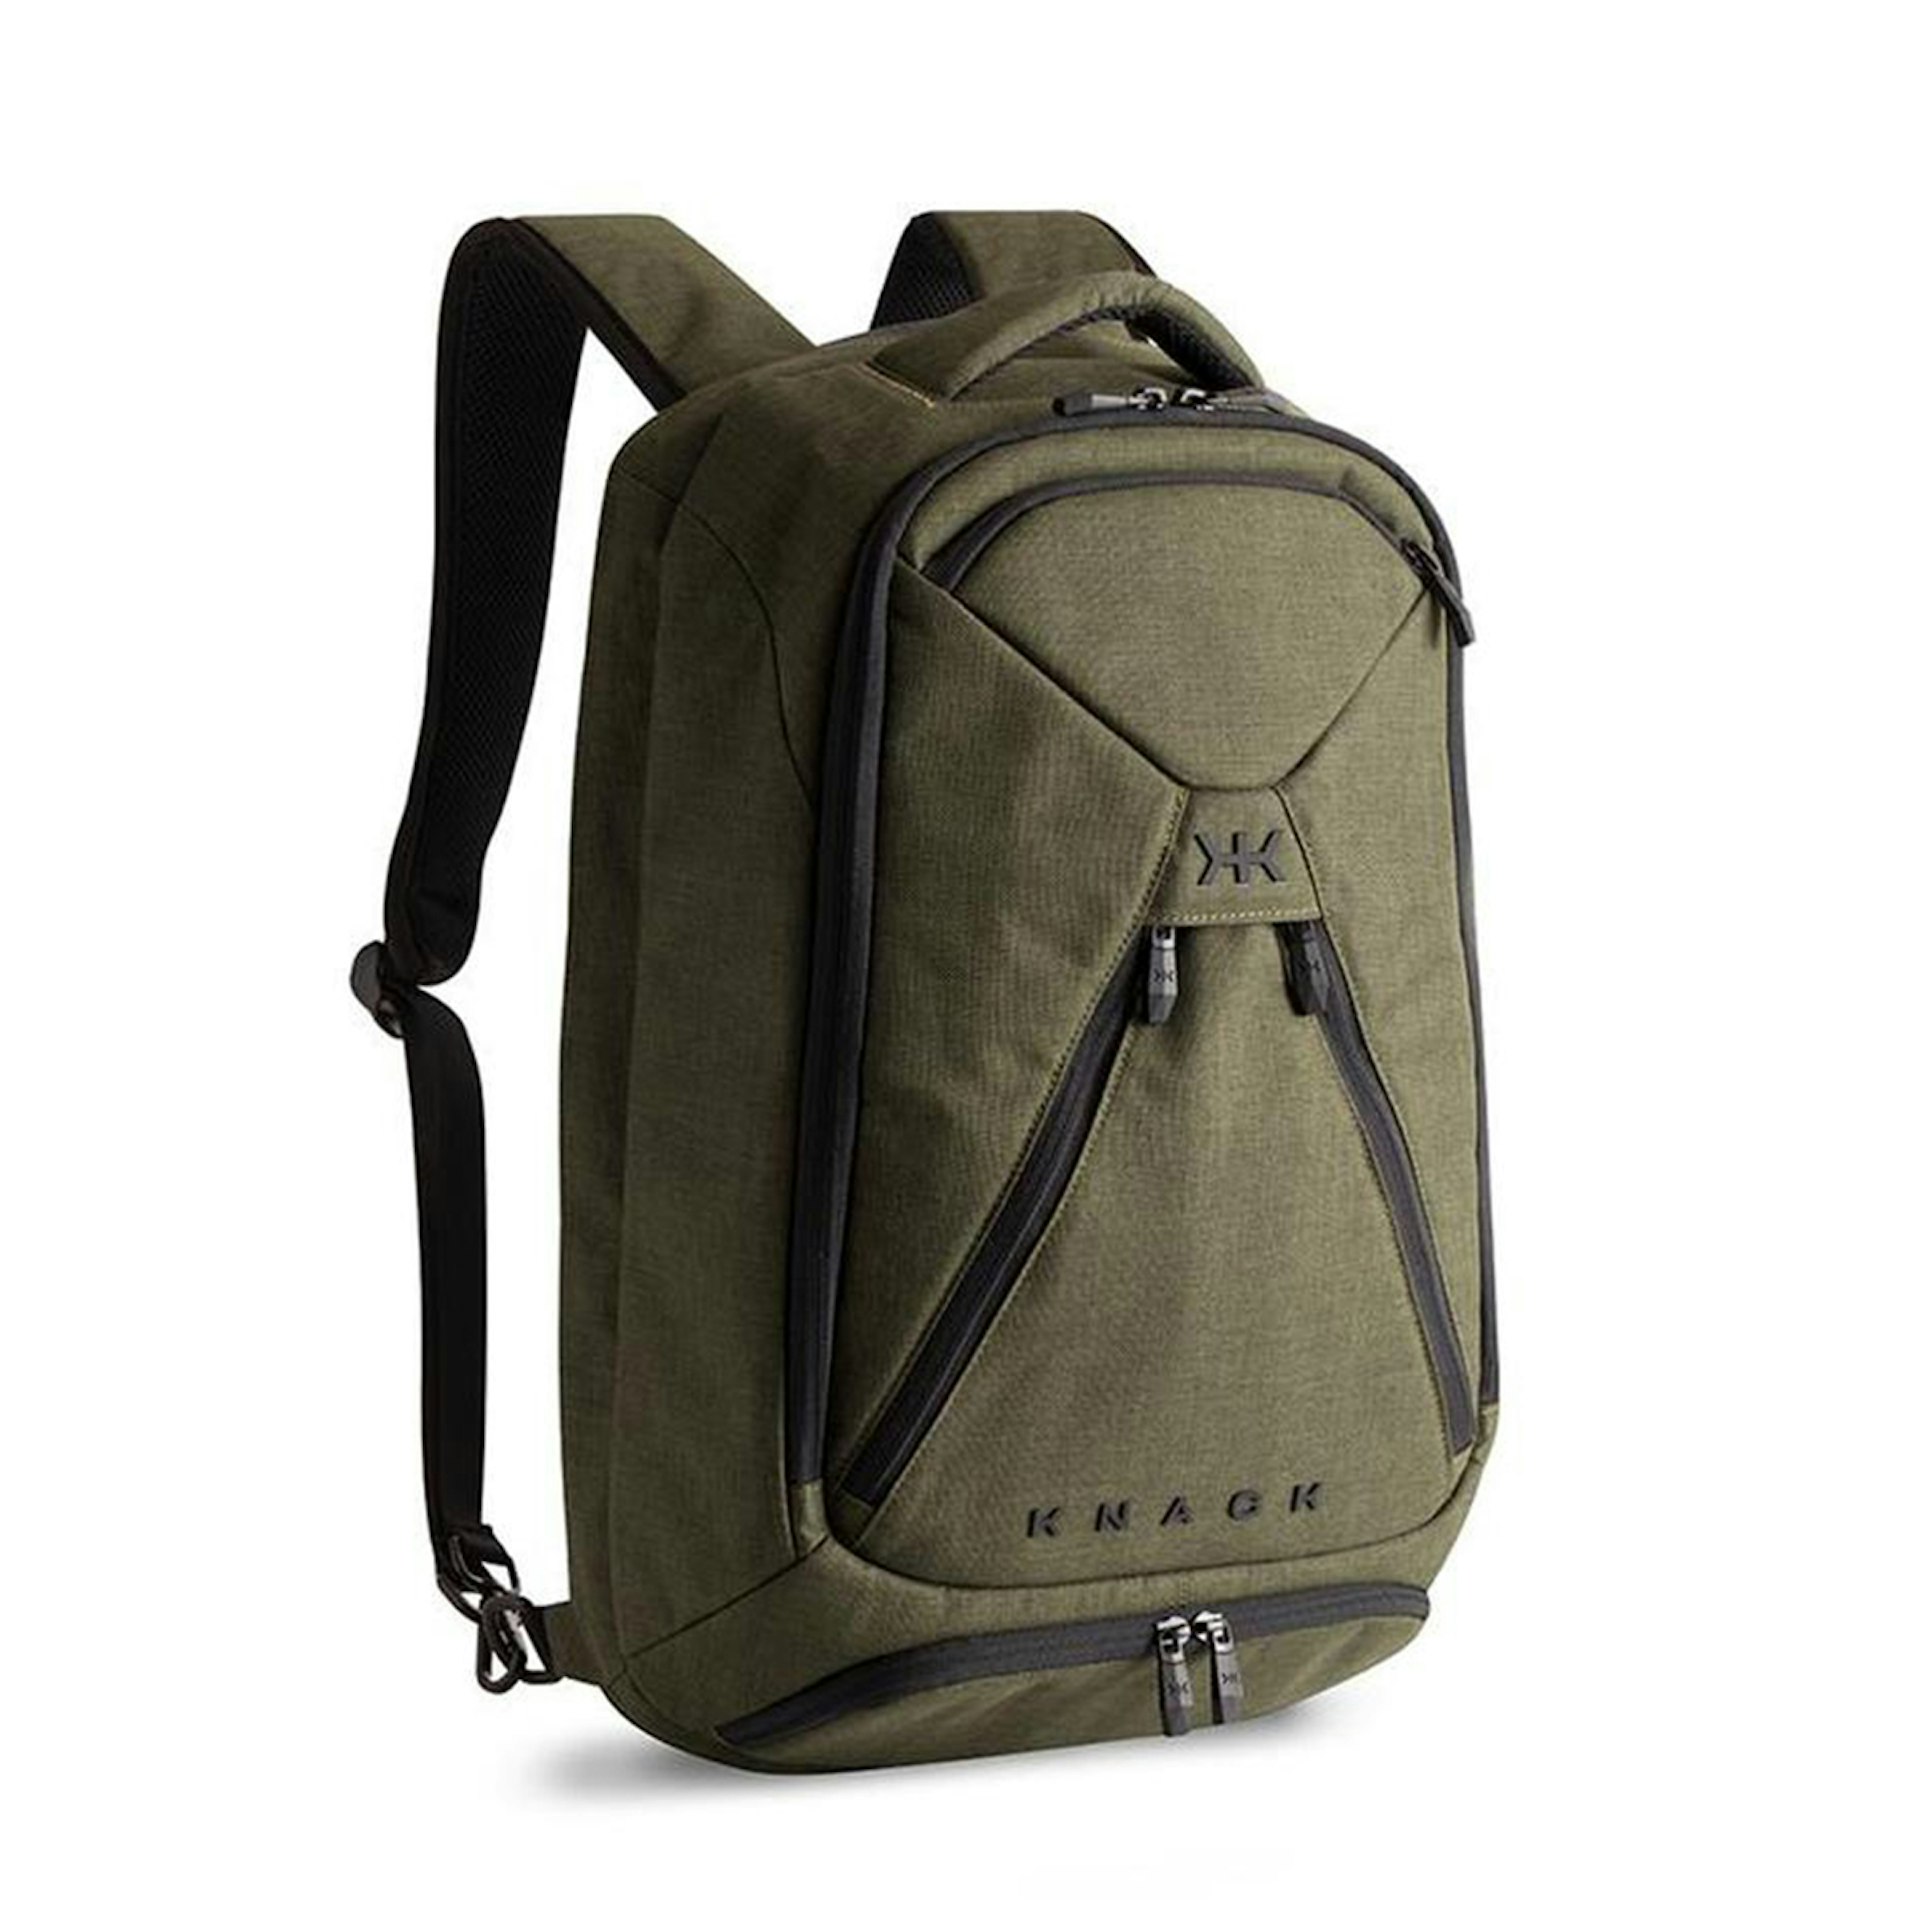 The Medium Expandable Knack Pack in Green